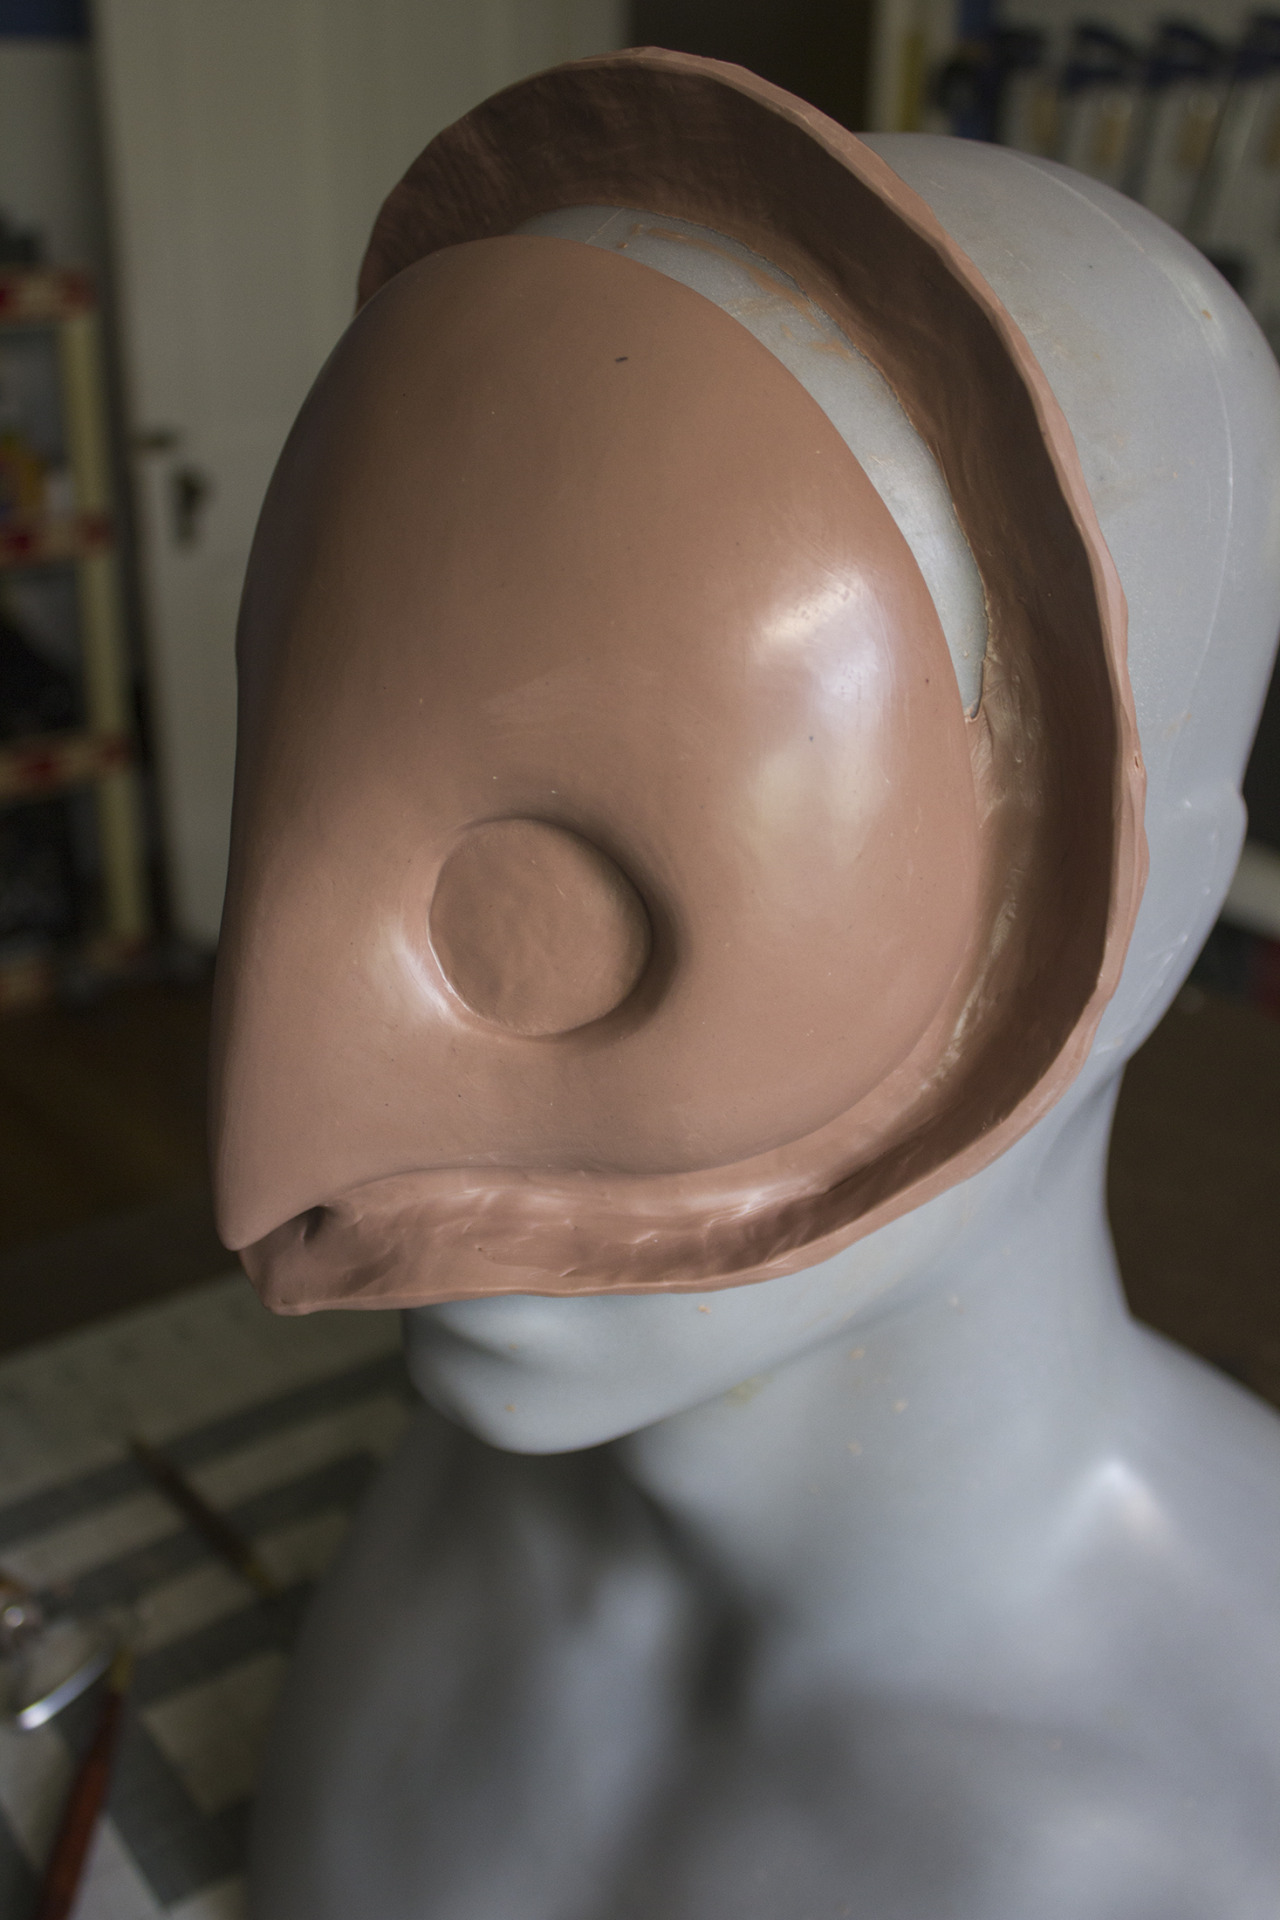 Elidibus/Amaurotine mask sculpt is done. Spent more time smoothing it & walled off to catch any runaway silicone.